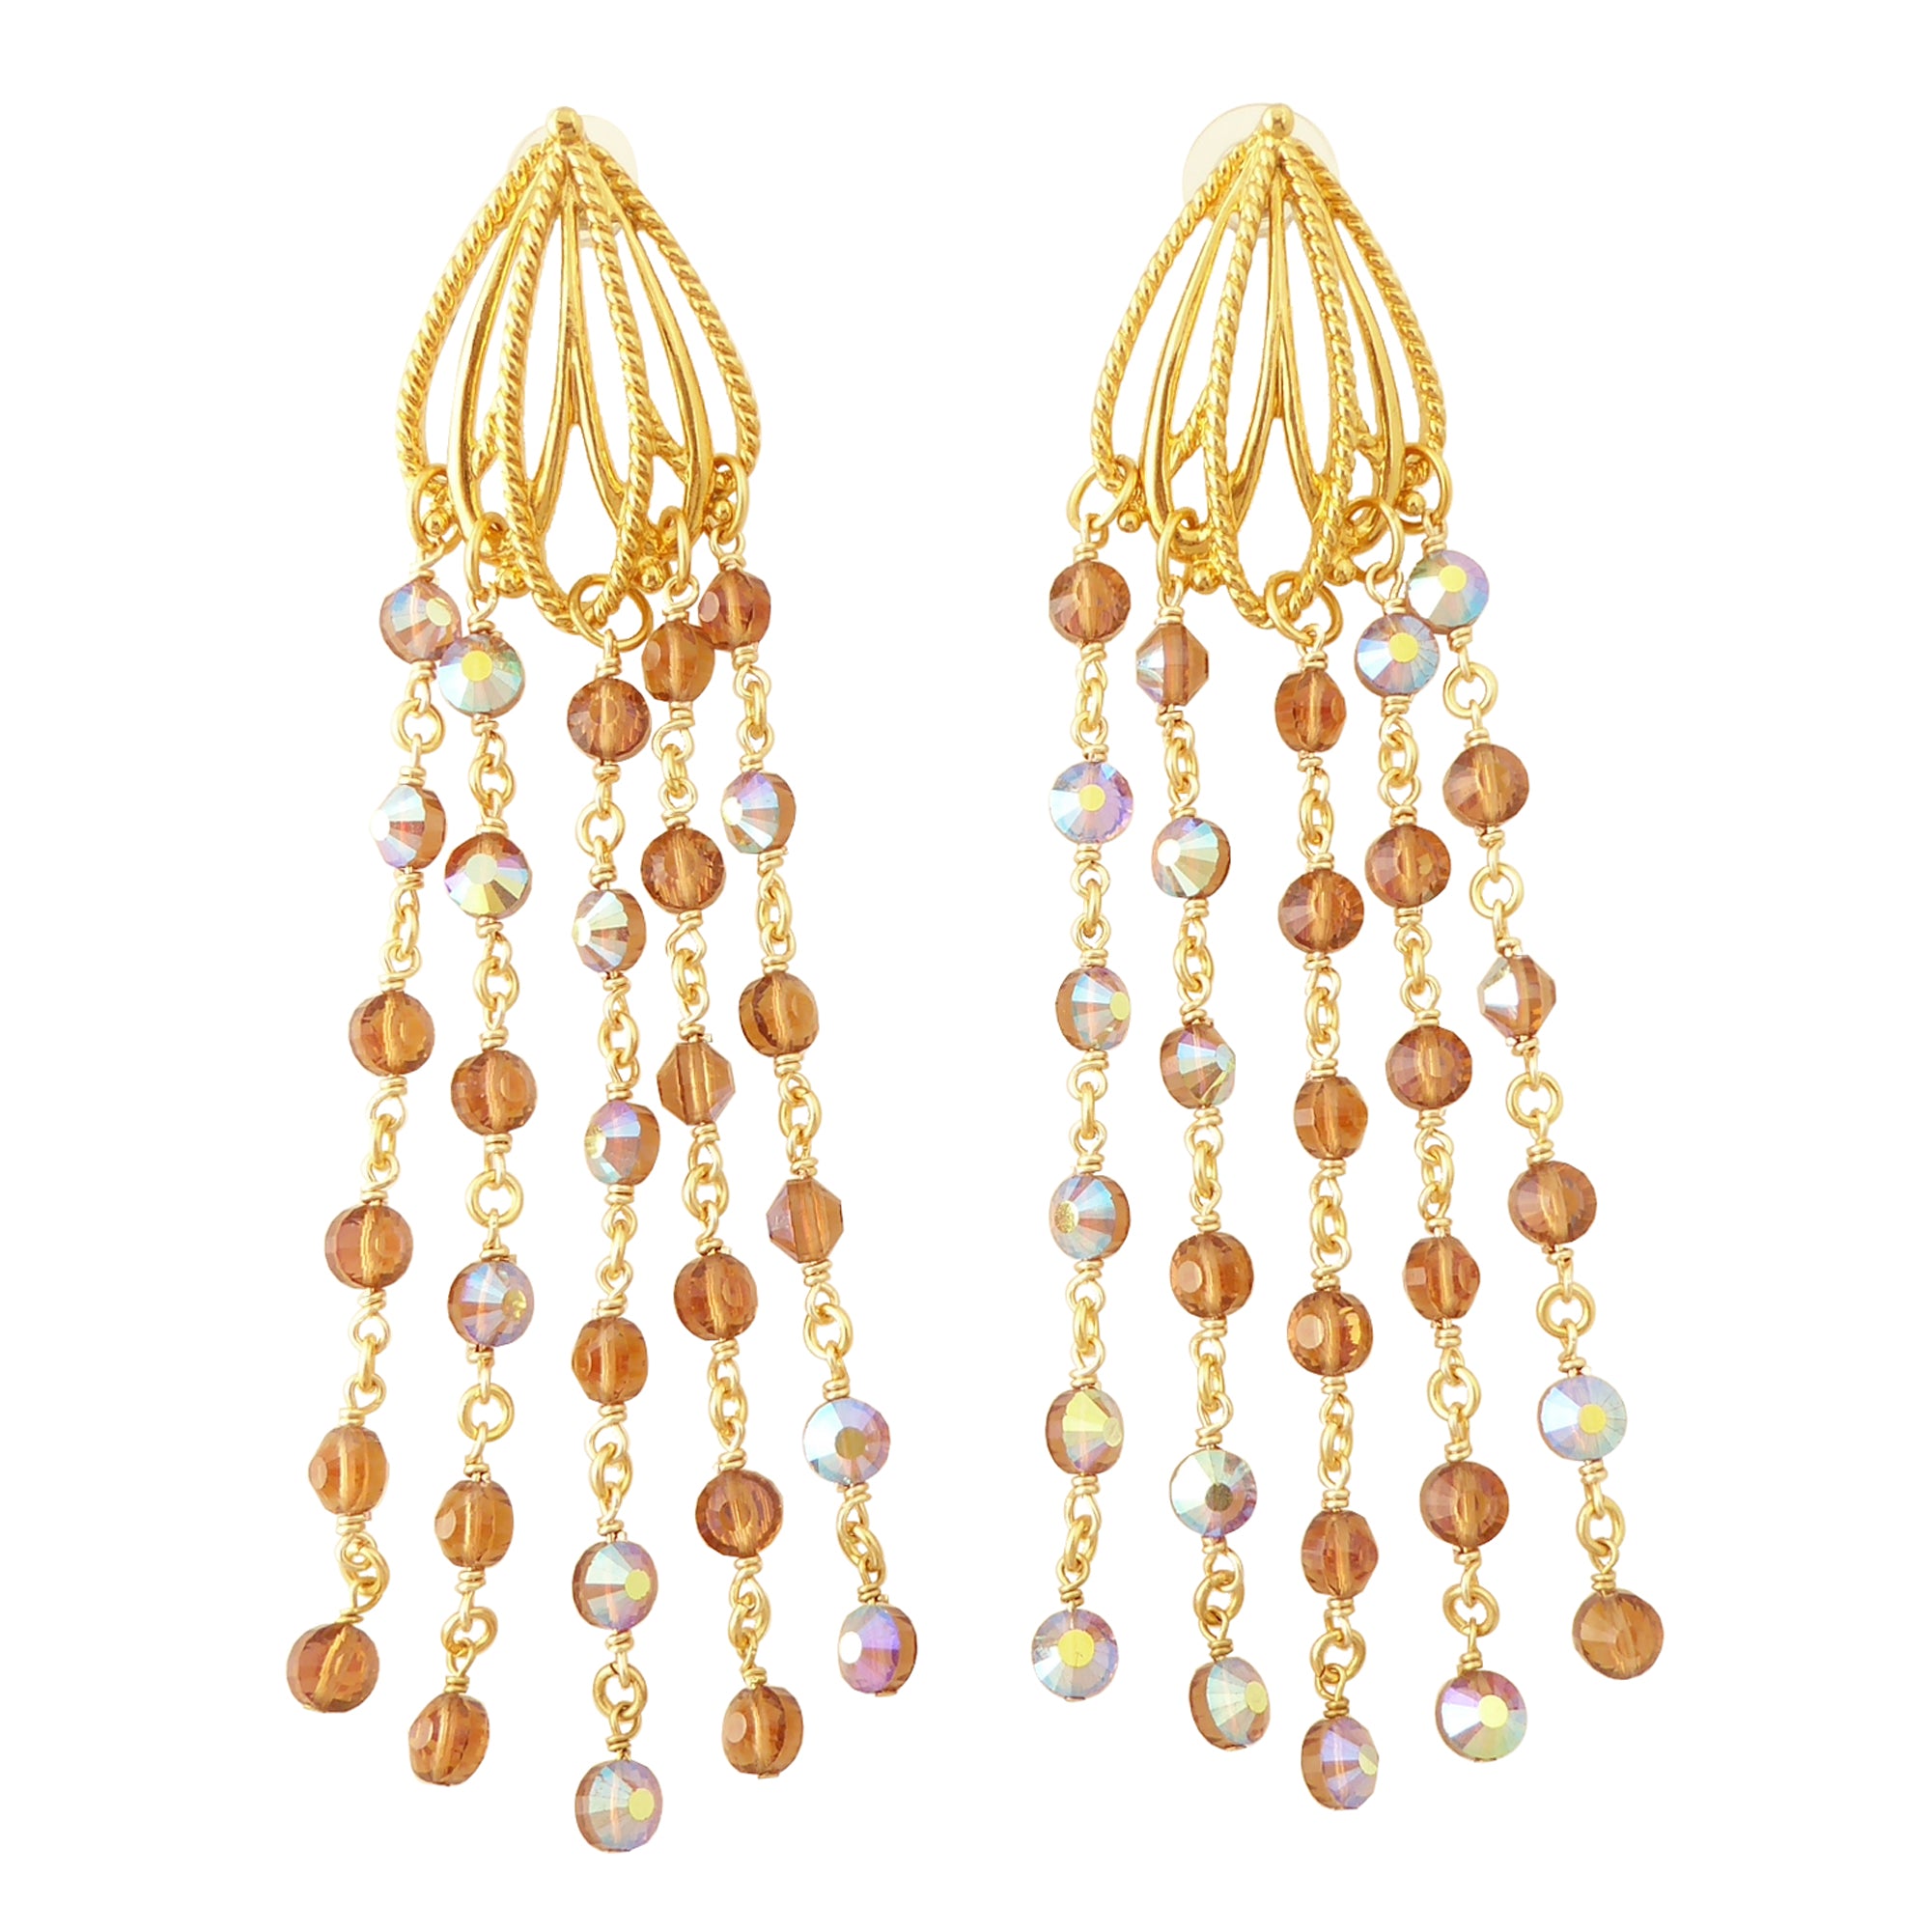 Iridescent topaz chandelier earrings by Jenny Dayco 1